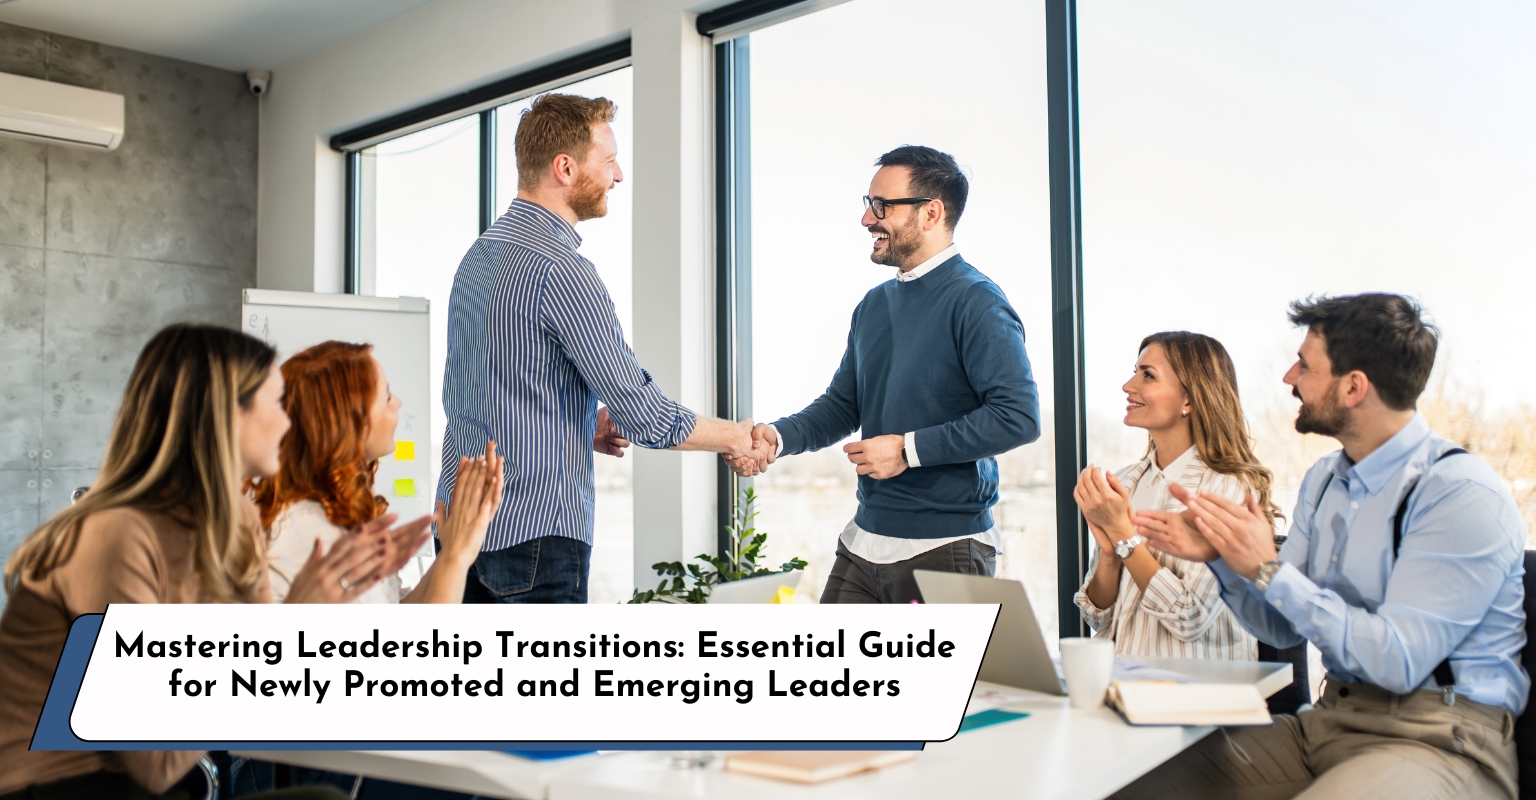 Leadership Transition Plan Illustrated: Guidance for Newly Promoted and Emerging Leaders